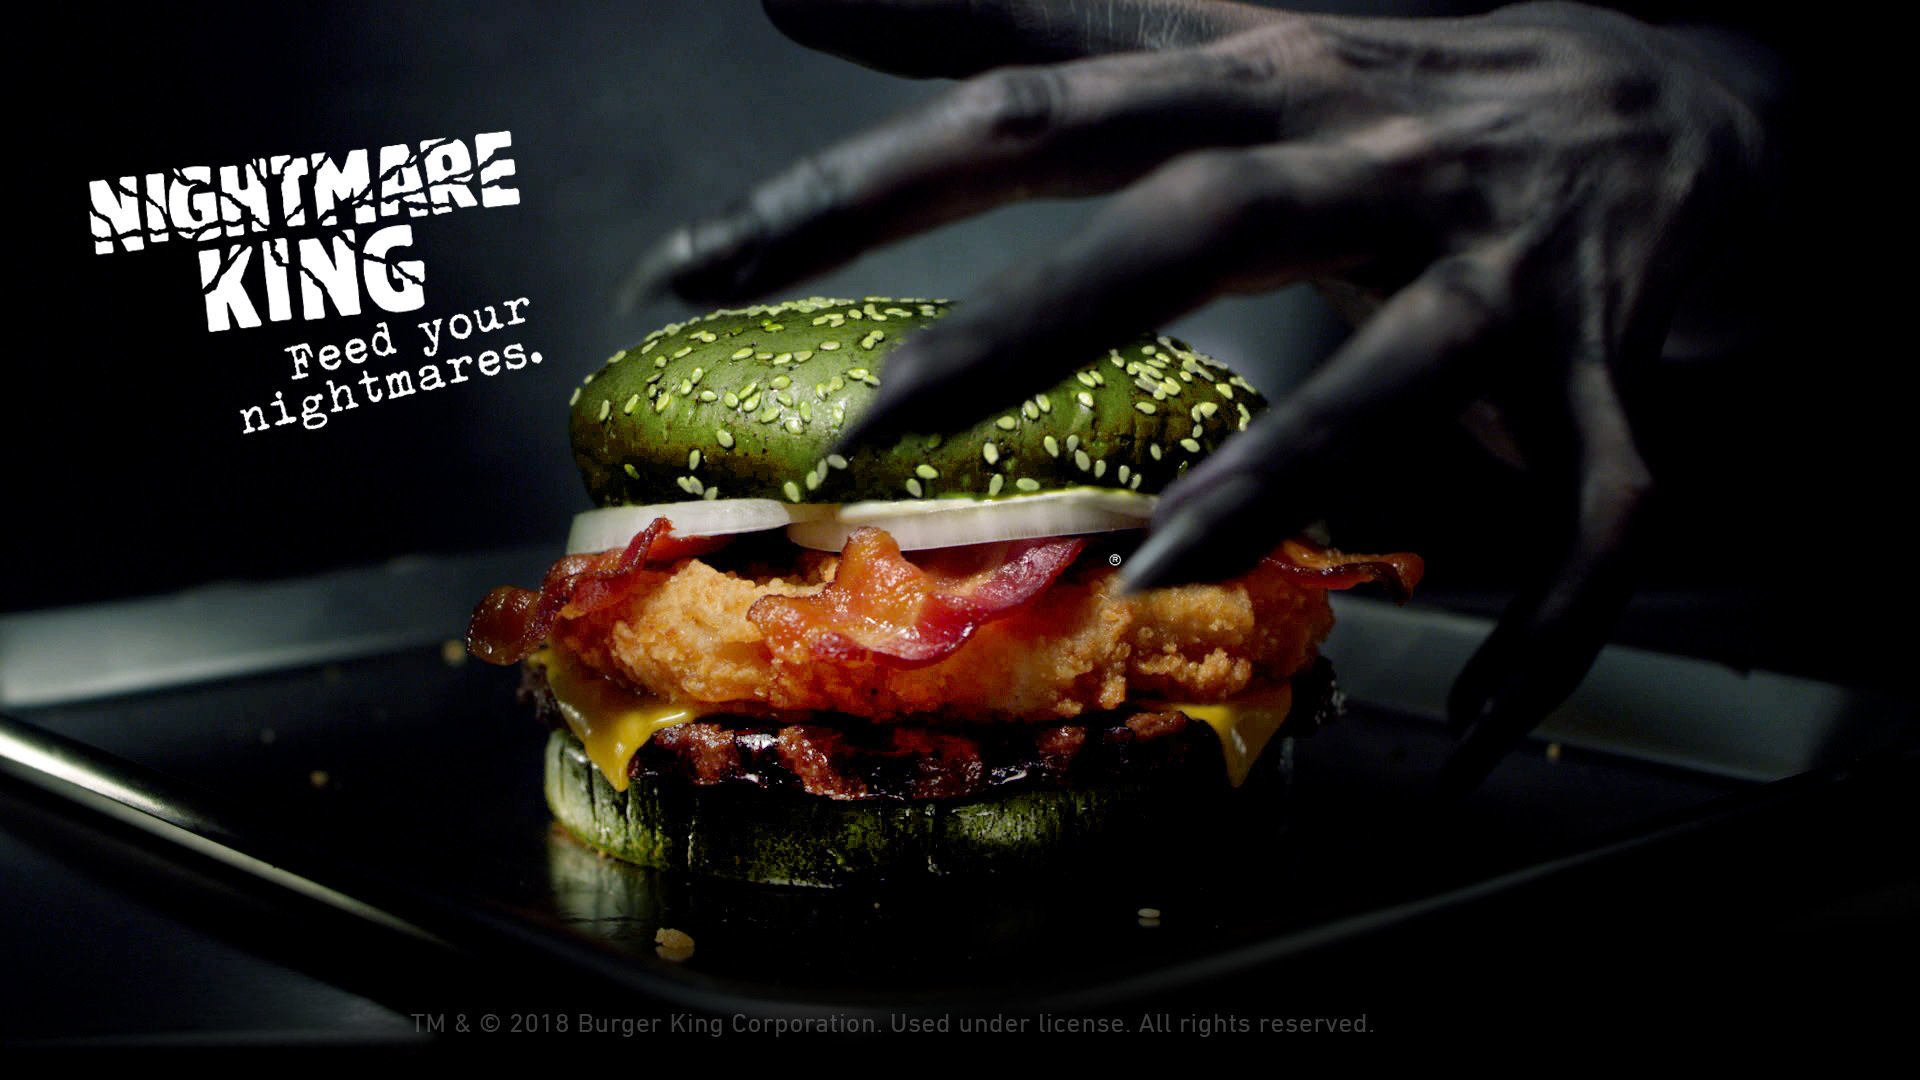 The Burger King Brand Creates A Halloween Sandwich Clinically Proven To Induce Nightmares Business Wire